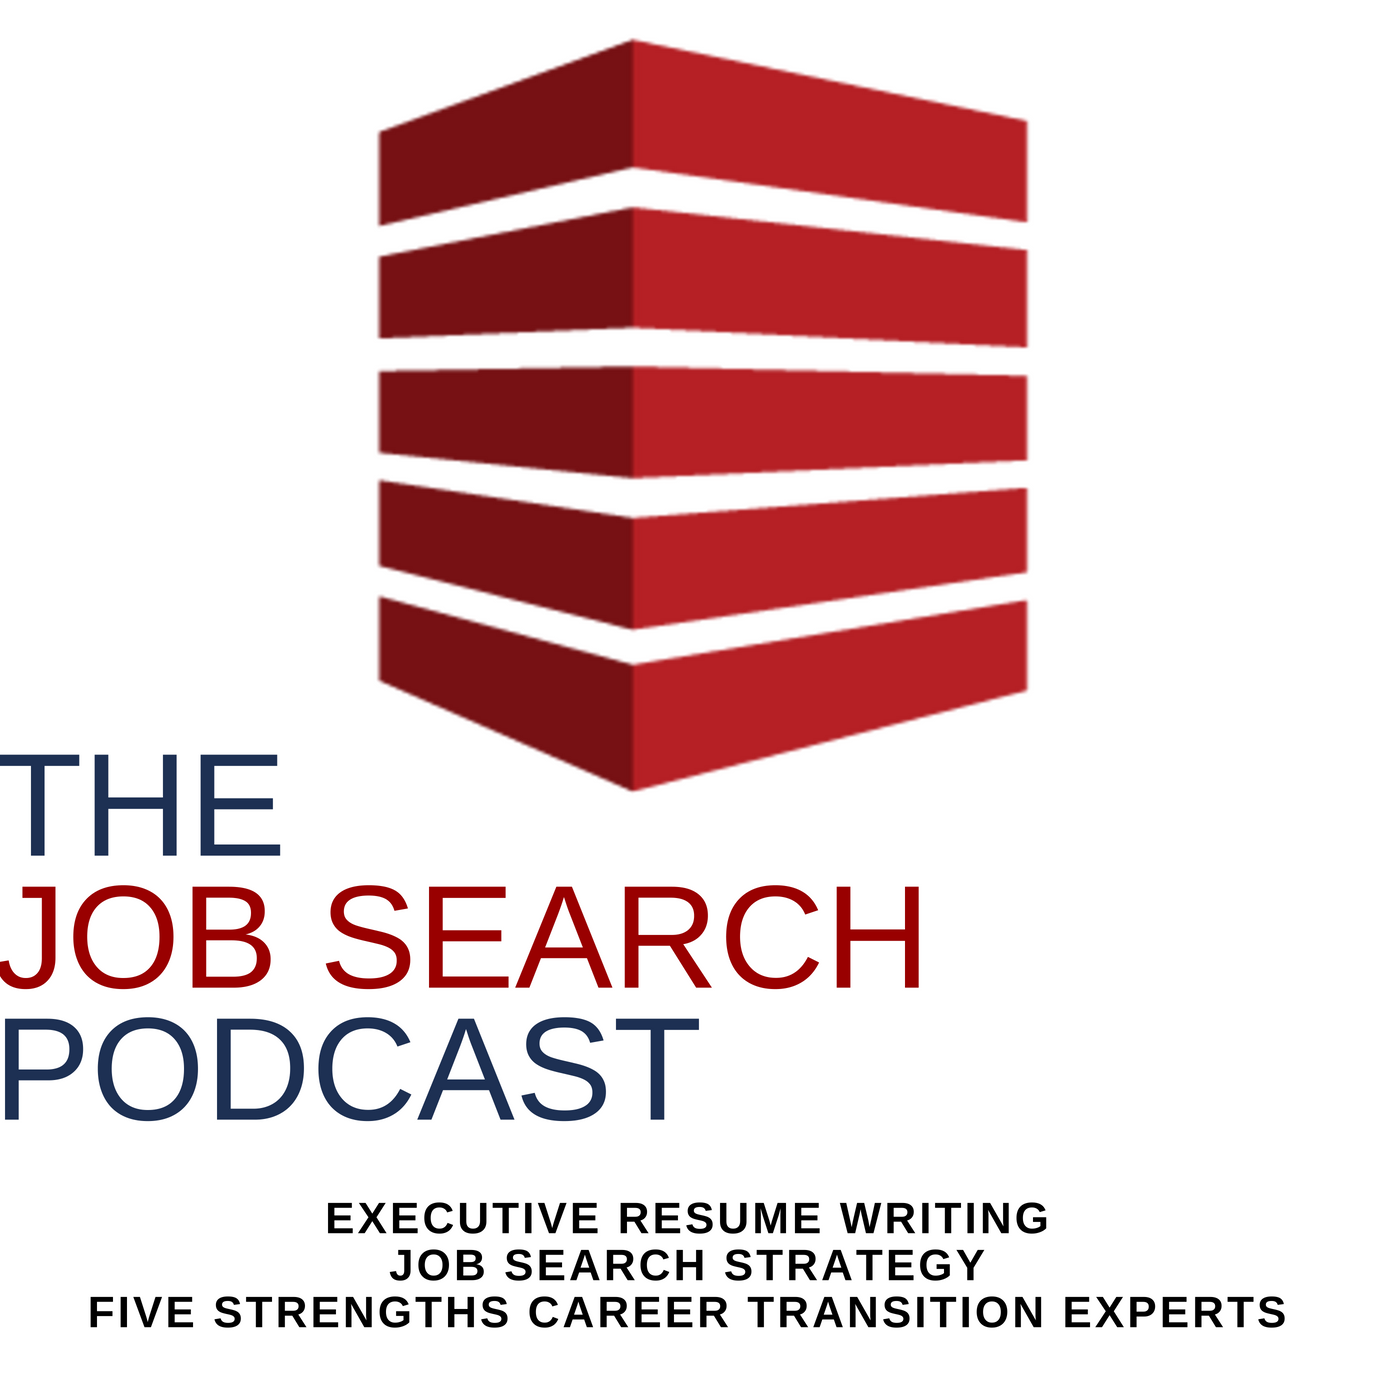 Show Pride and Humility in Your Executive Resume | The Job Search Podcast